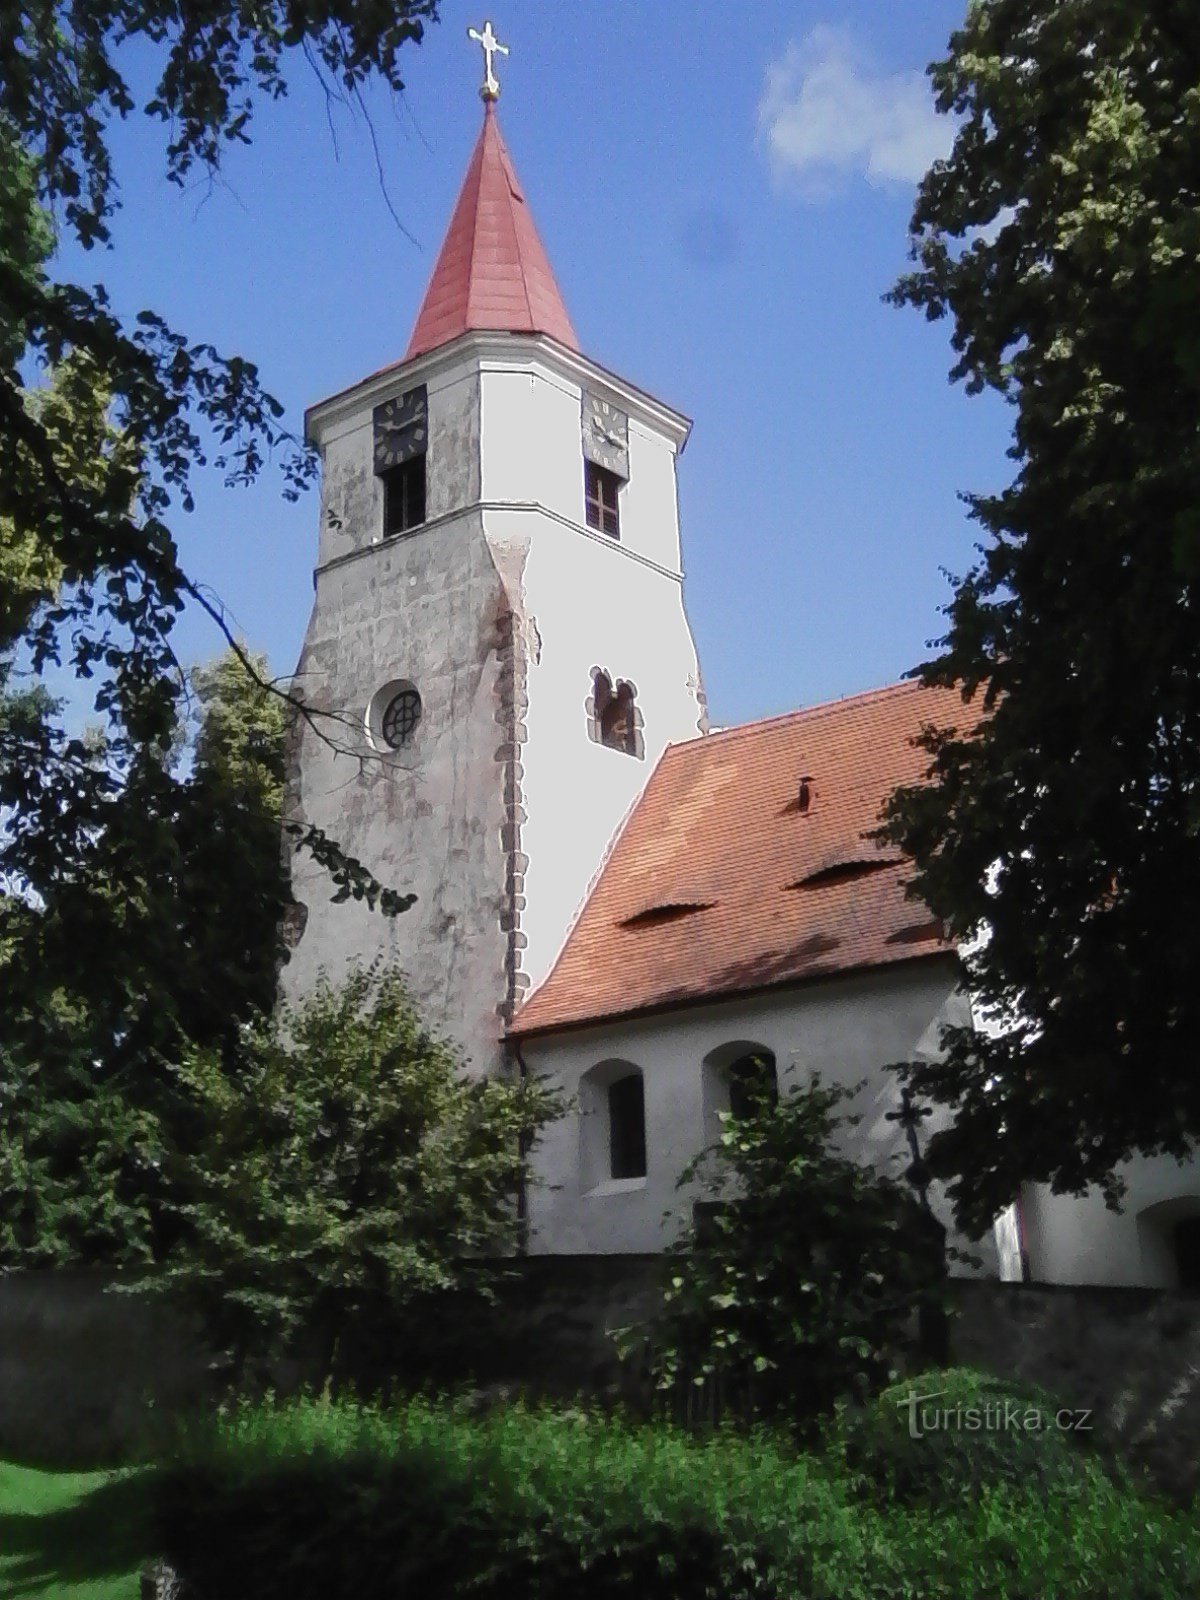 2. Late Romanesque church of St. Mikuláš in Nechvalice, perhaps from around 1240.